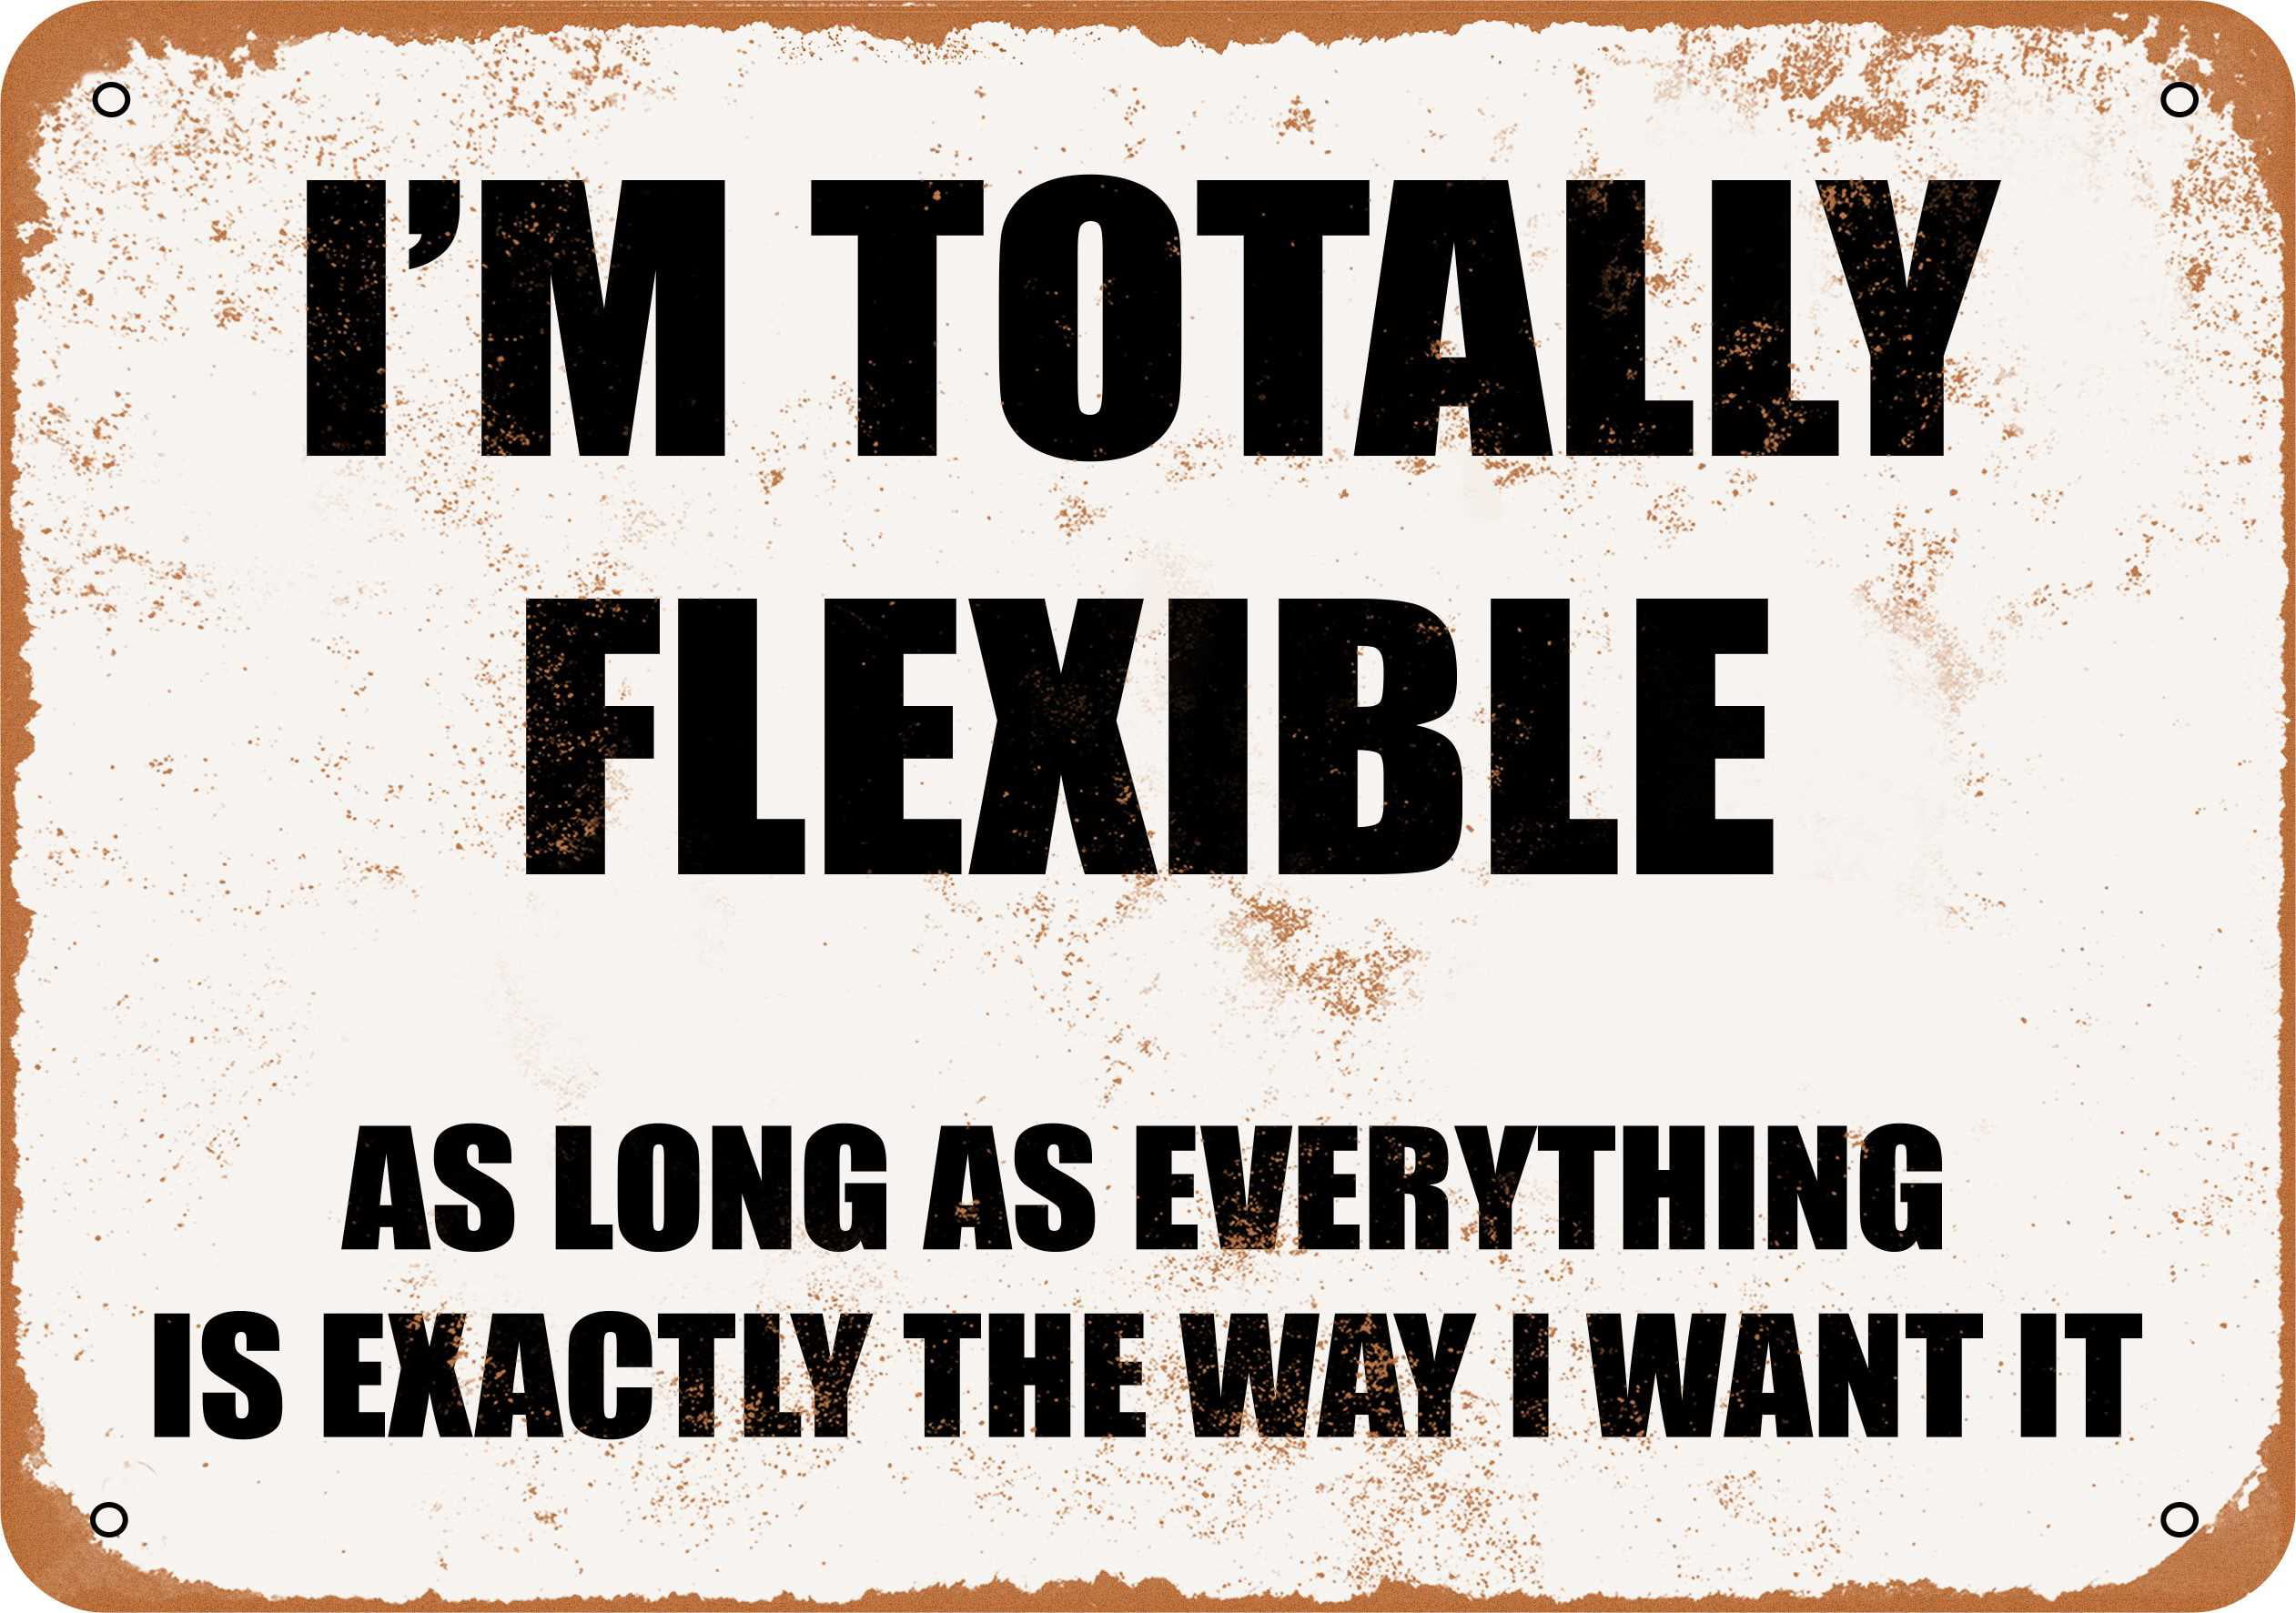 I can be flexible. As long as everything is the way I want it, I